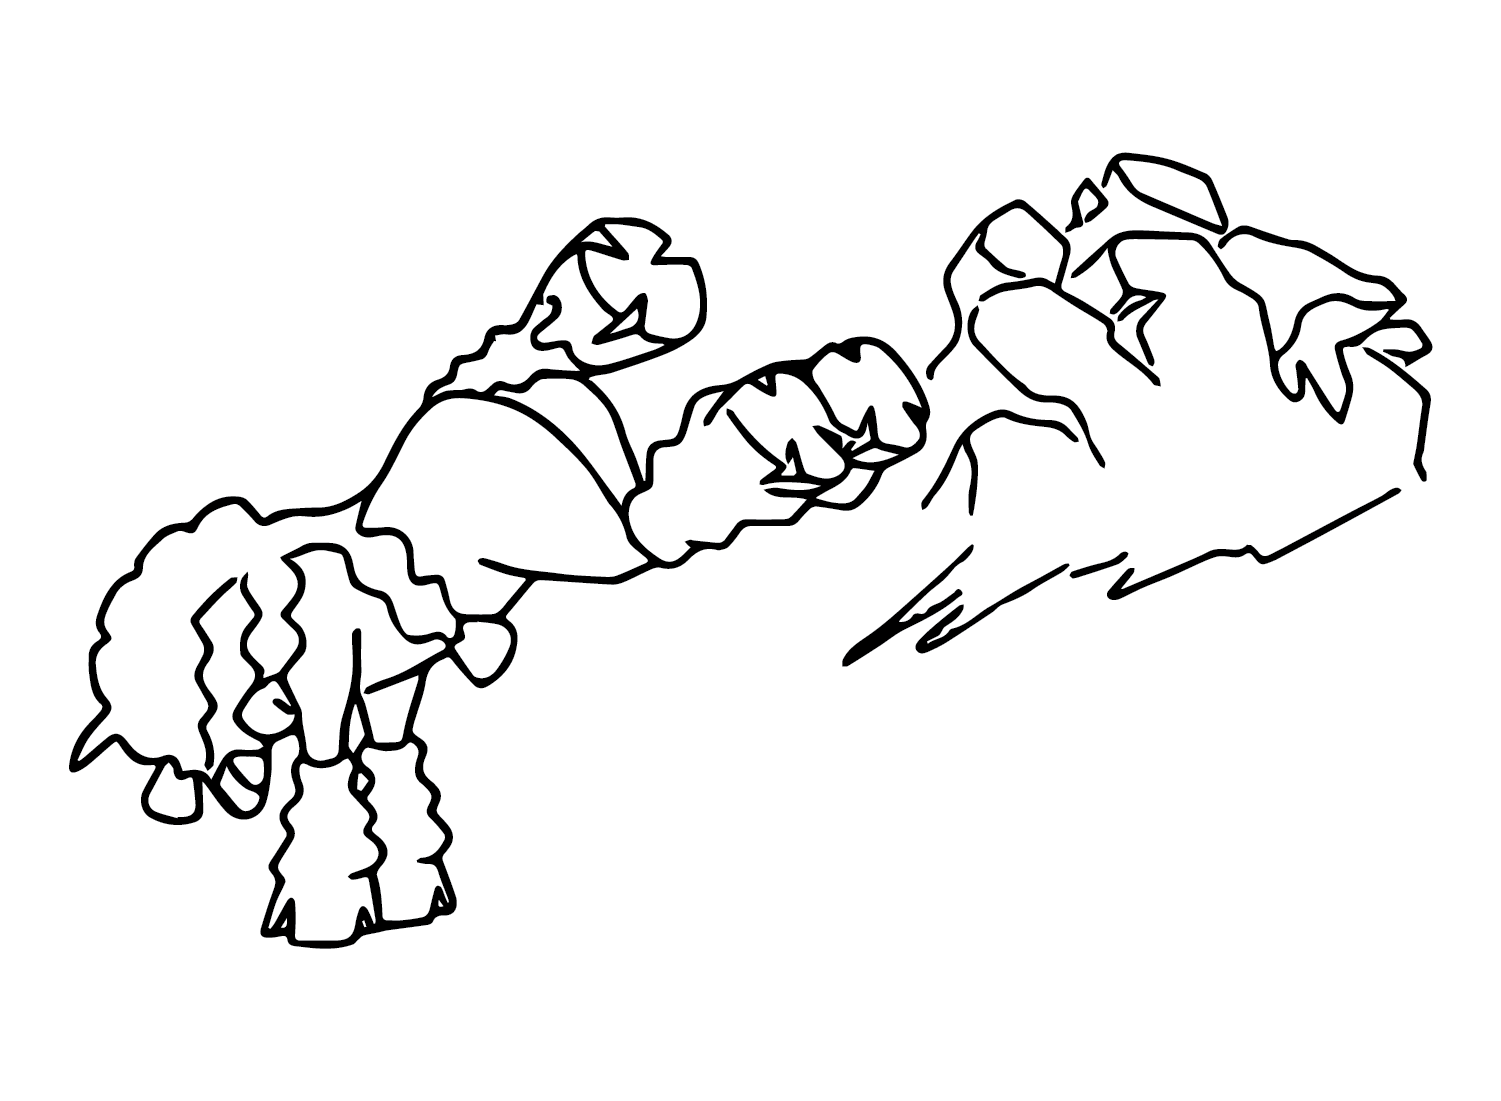 Mudsdale Strokes Coloring Page